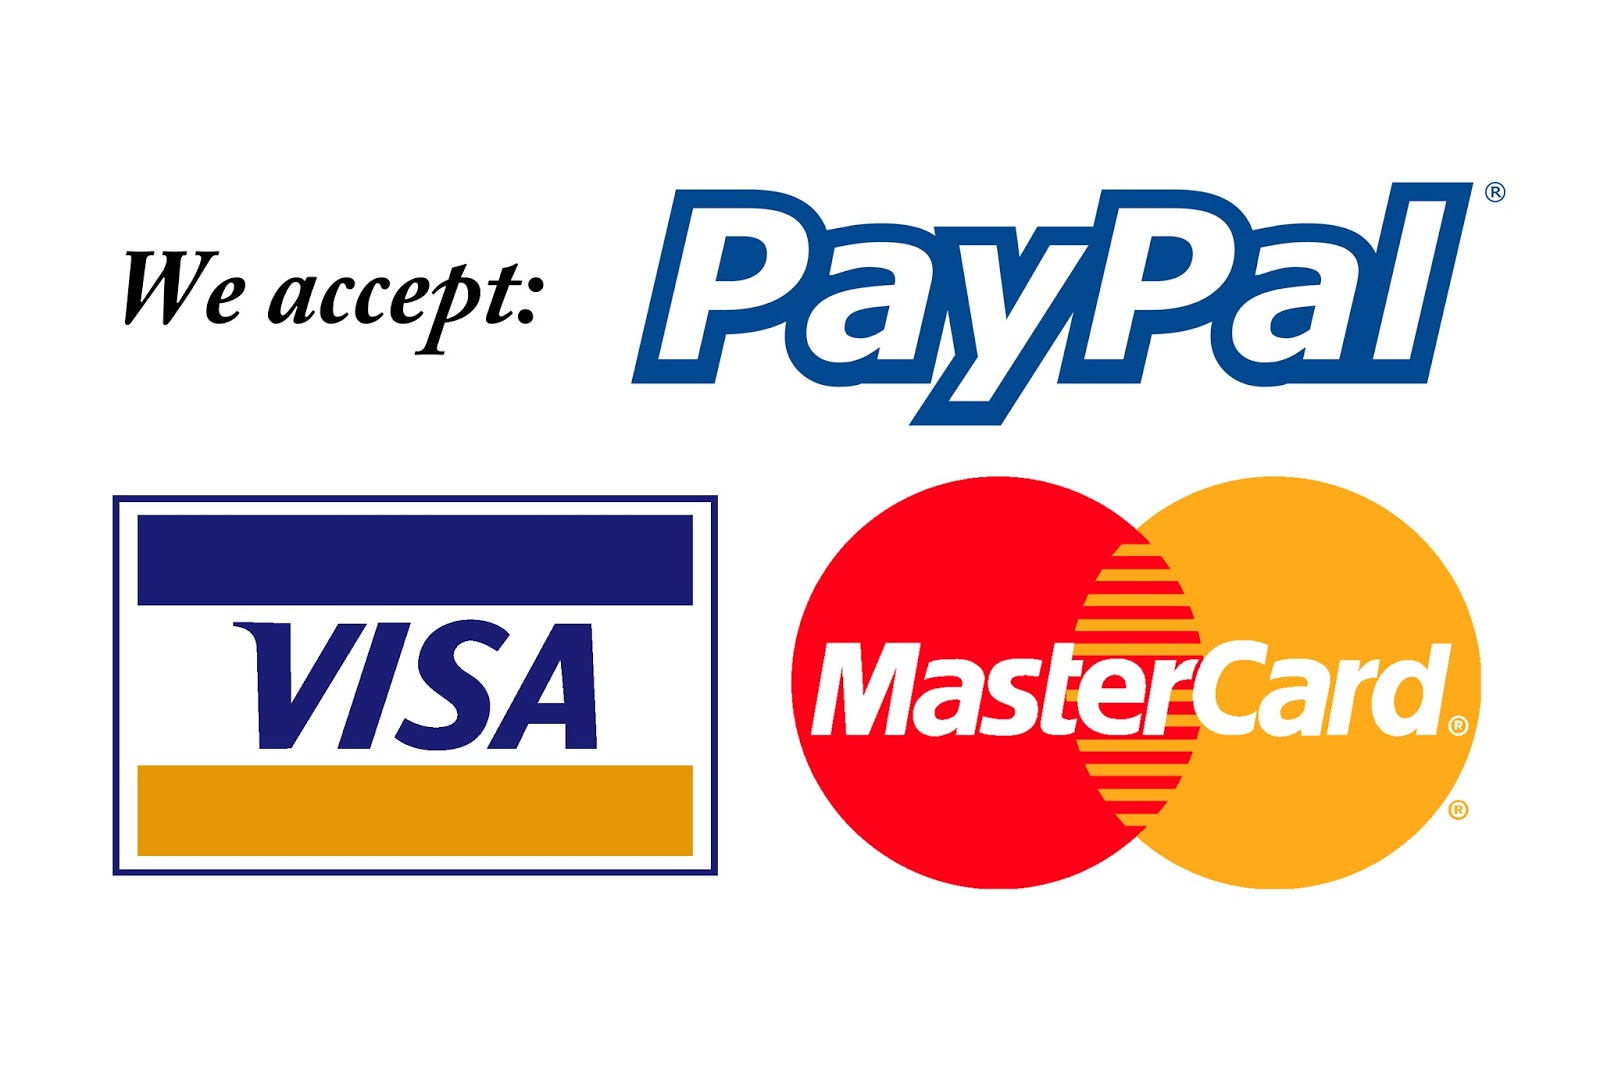 hurray-credit-card-payment-and-installment-plans-will-be-available